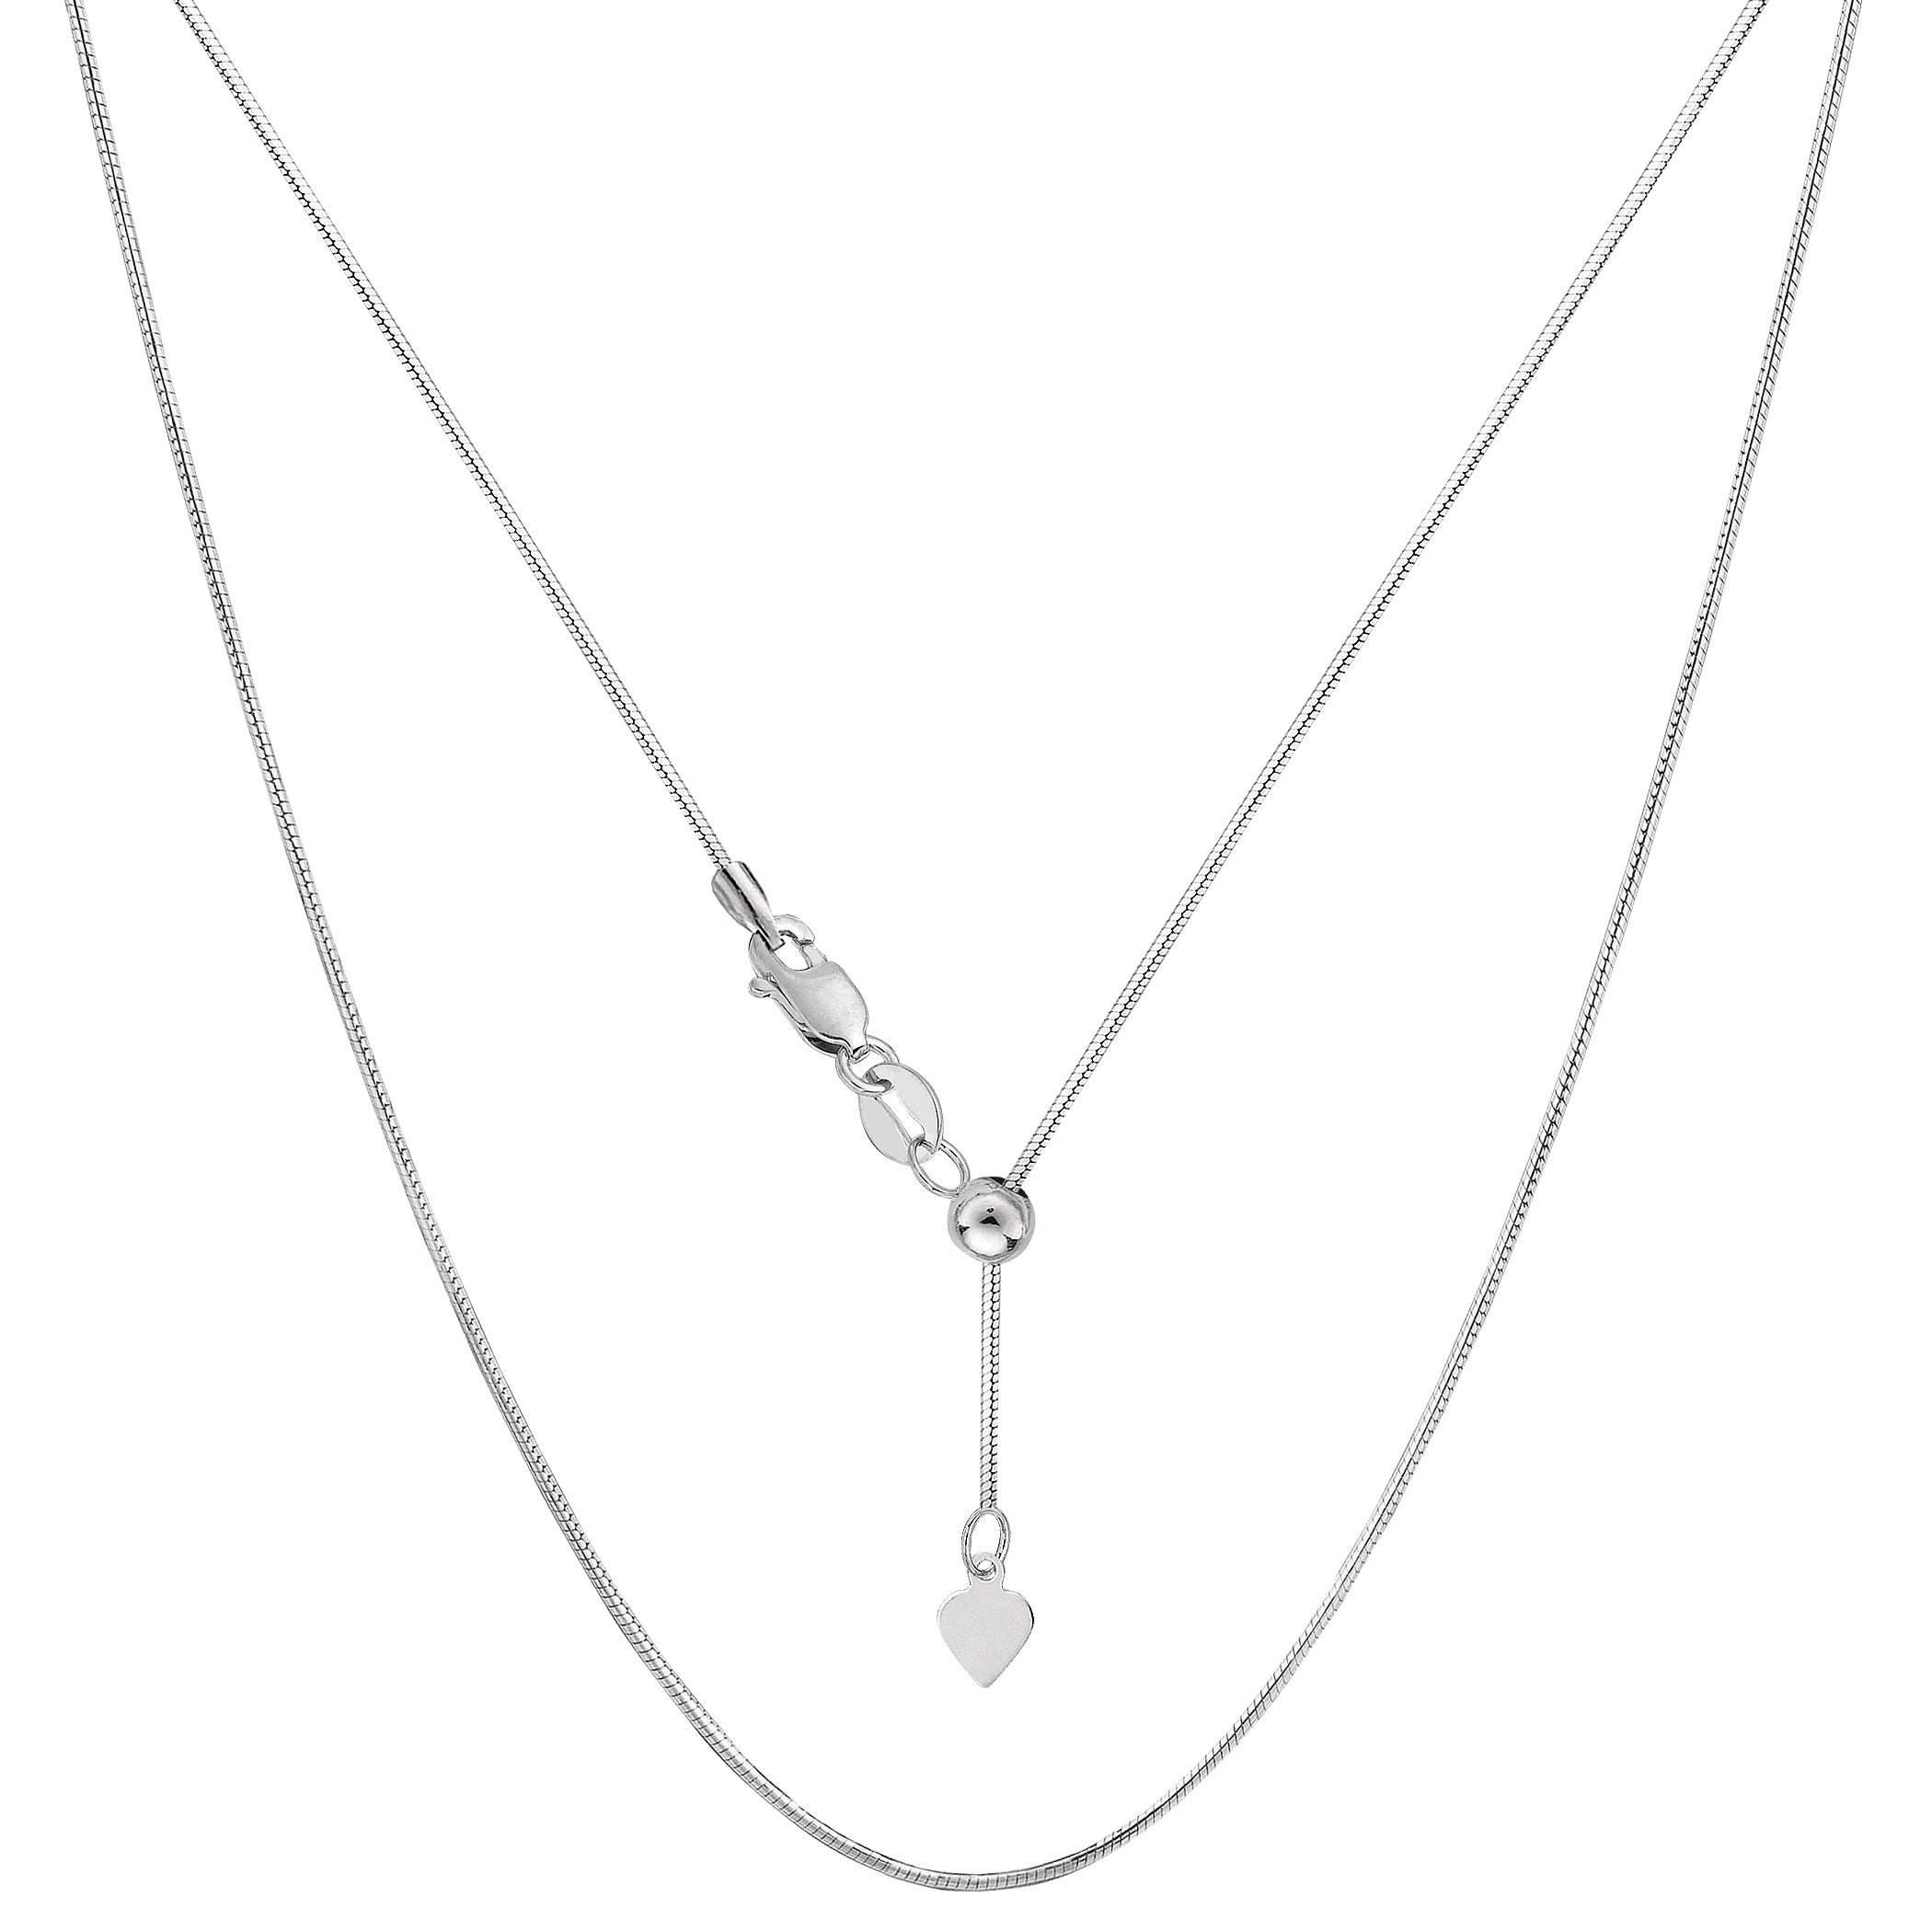 14k White Gold Adjustable Octagonal Snake Chain Necklace, 0.85mm, 22" fine designer jewelry for men and women